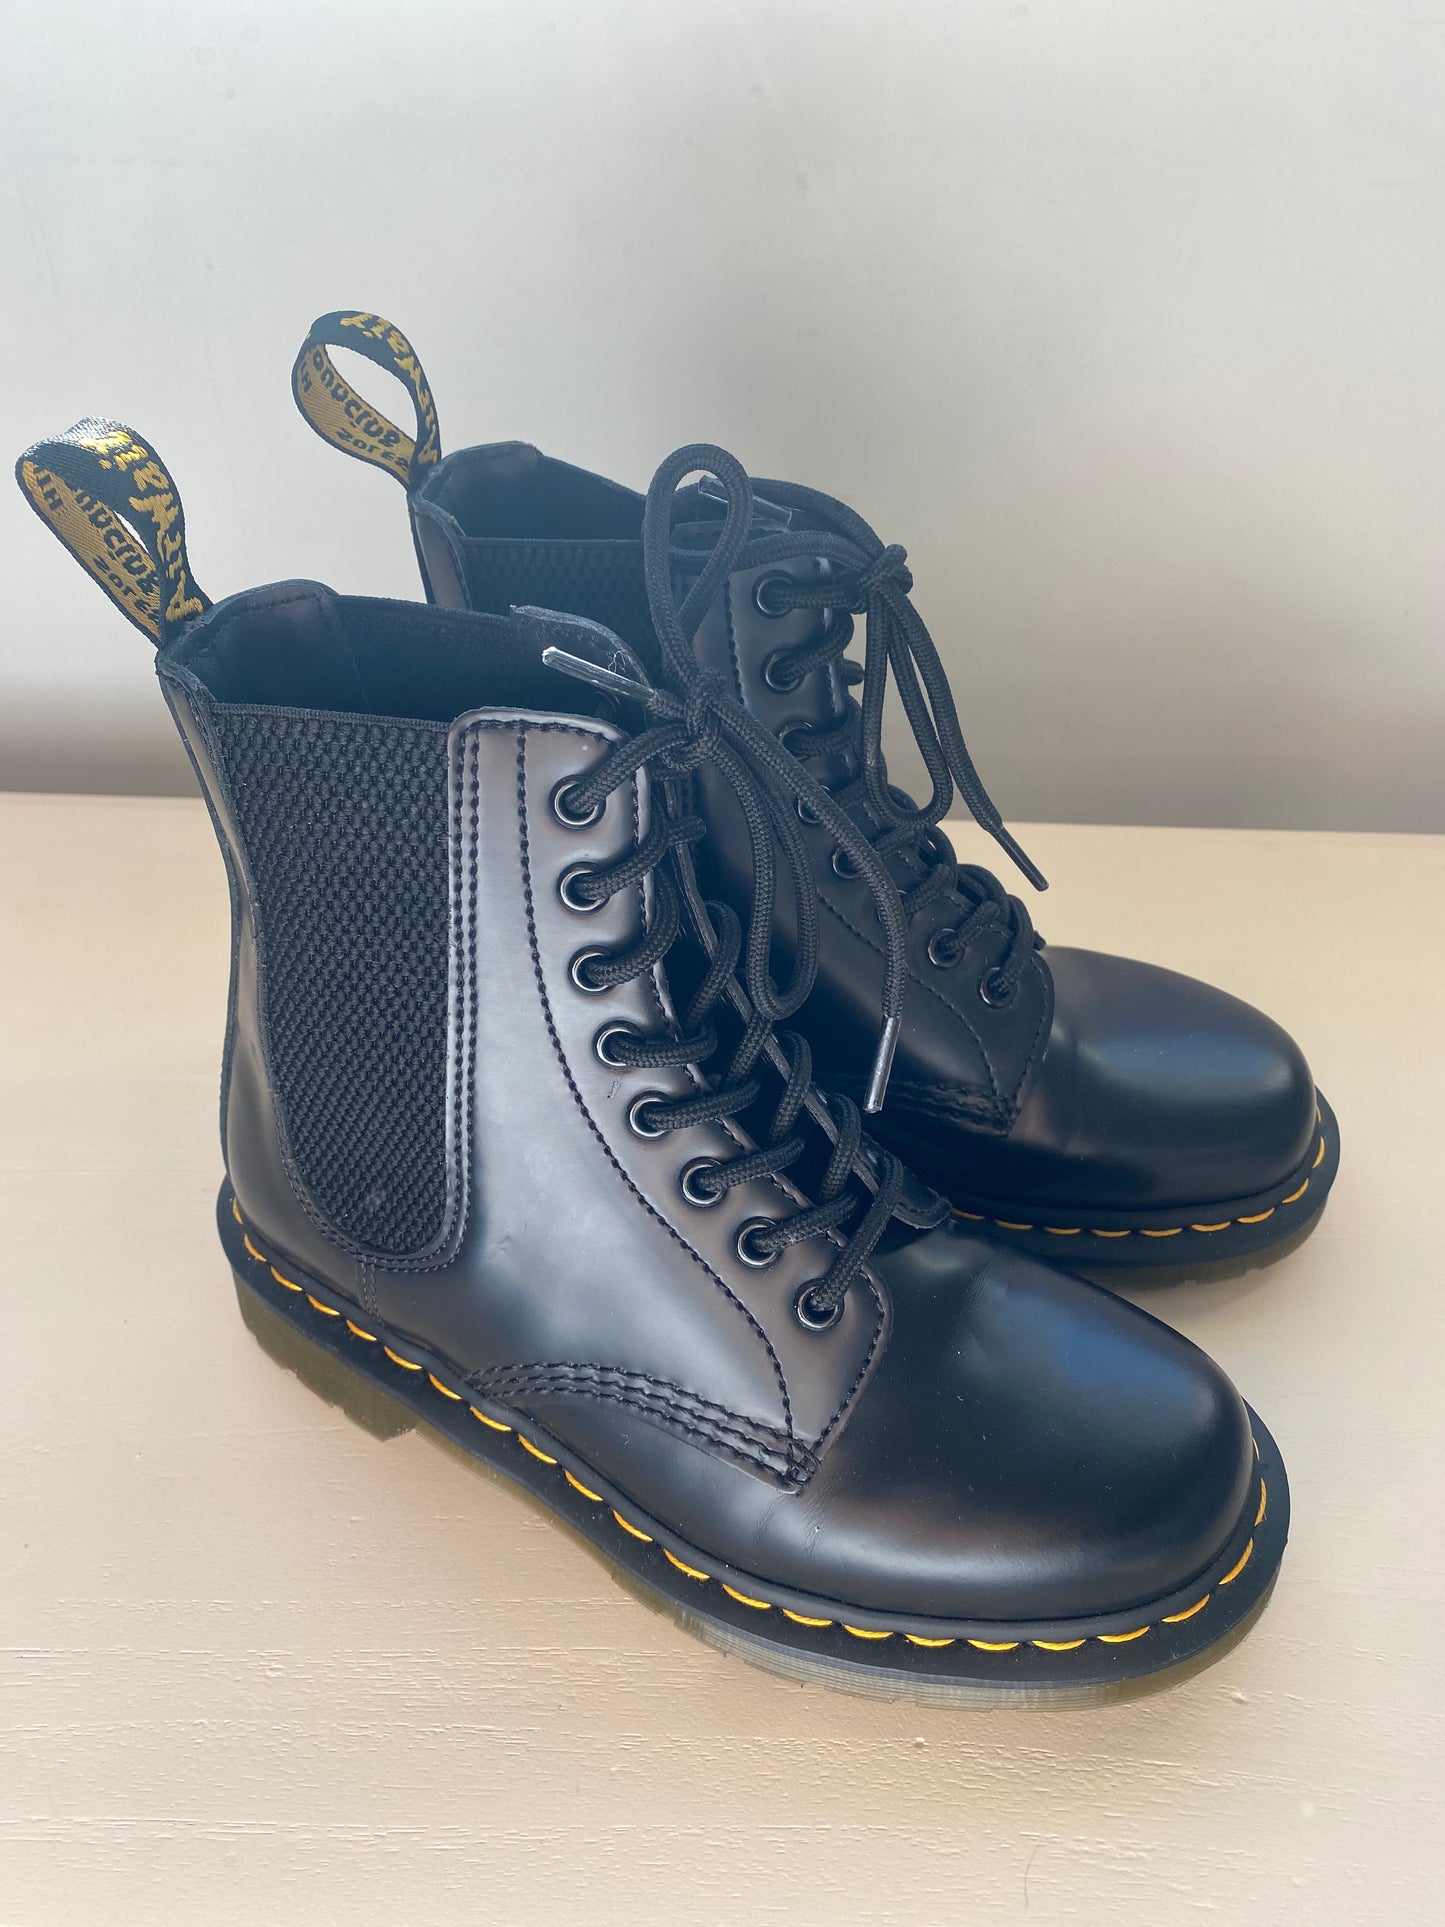 Brand New | Dr. Martens 1460 Harper Smooth Leather Lace Up Boots | RARE | EU37 (Adult)